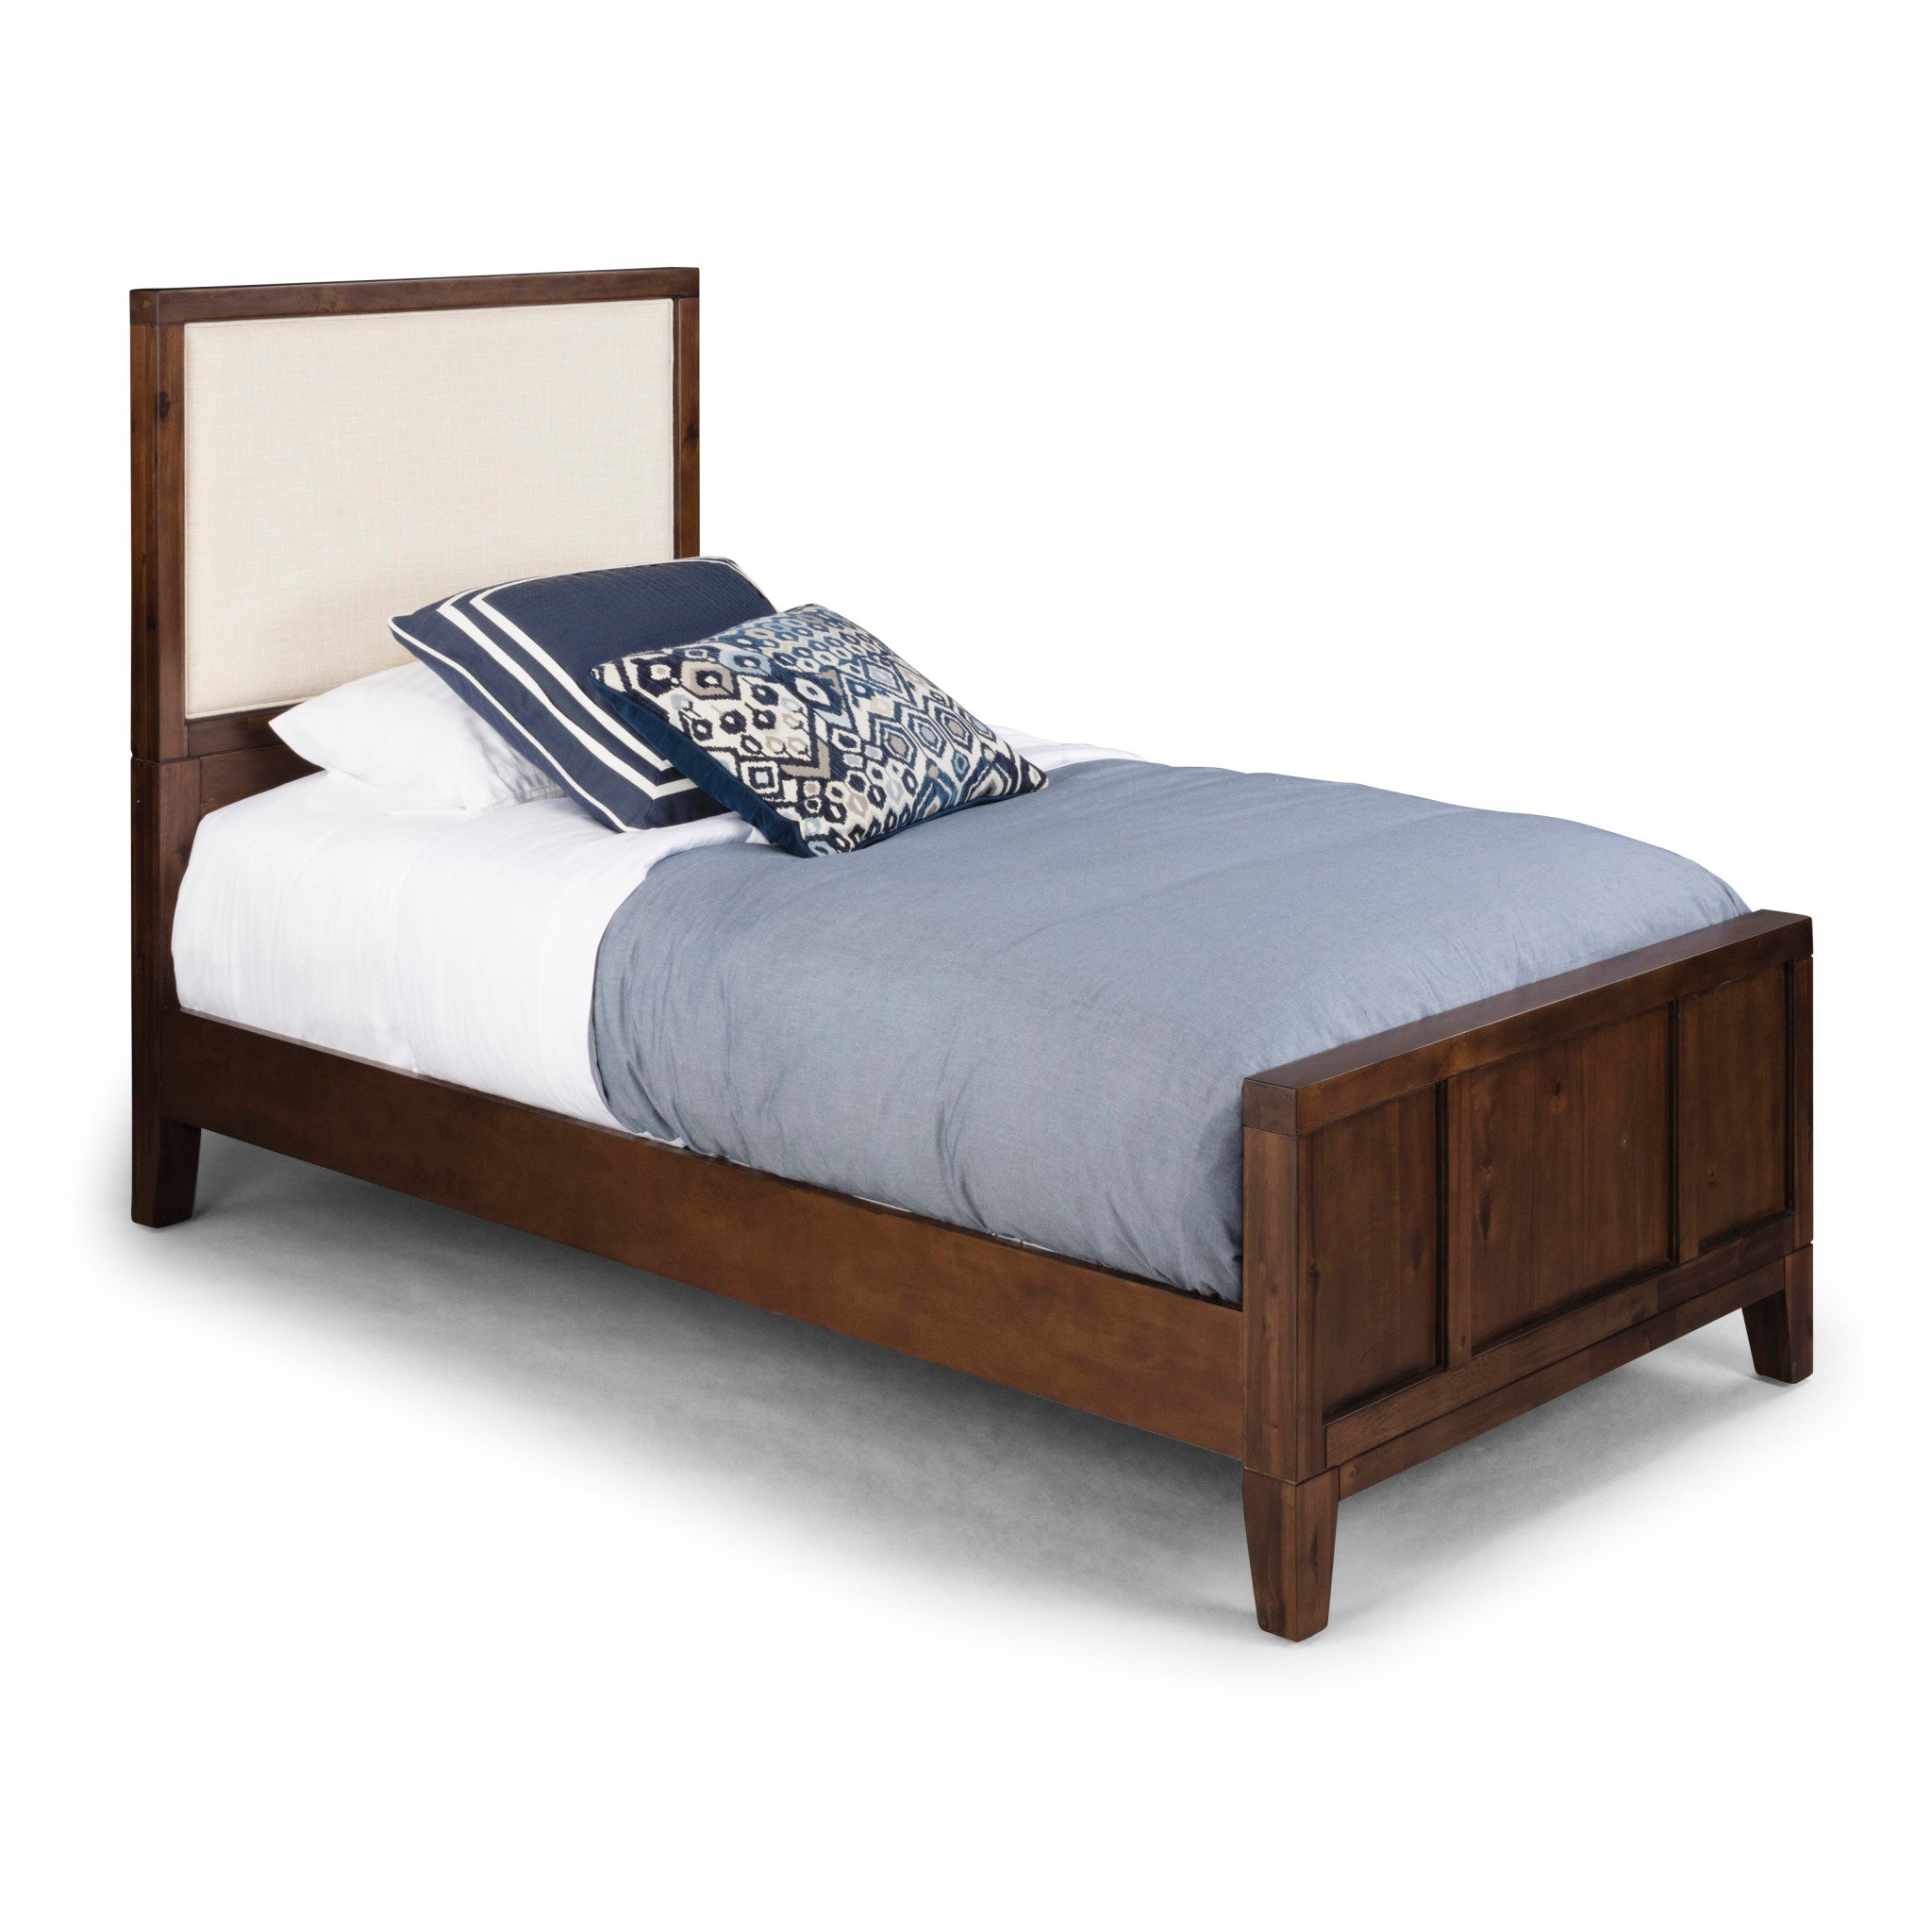 Bungalow Brown Twin Bed - image 2 of 9